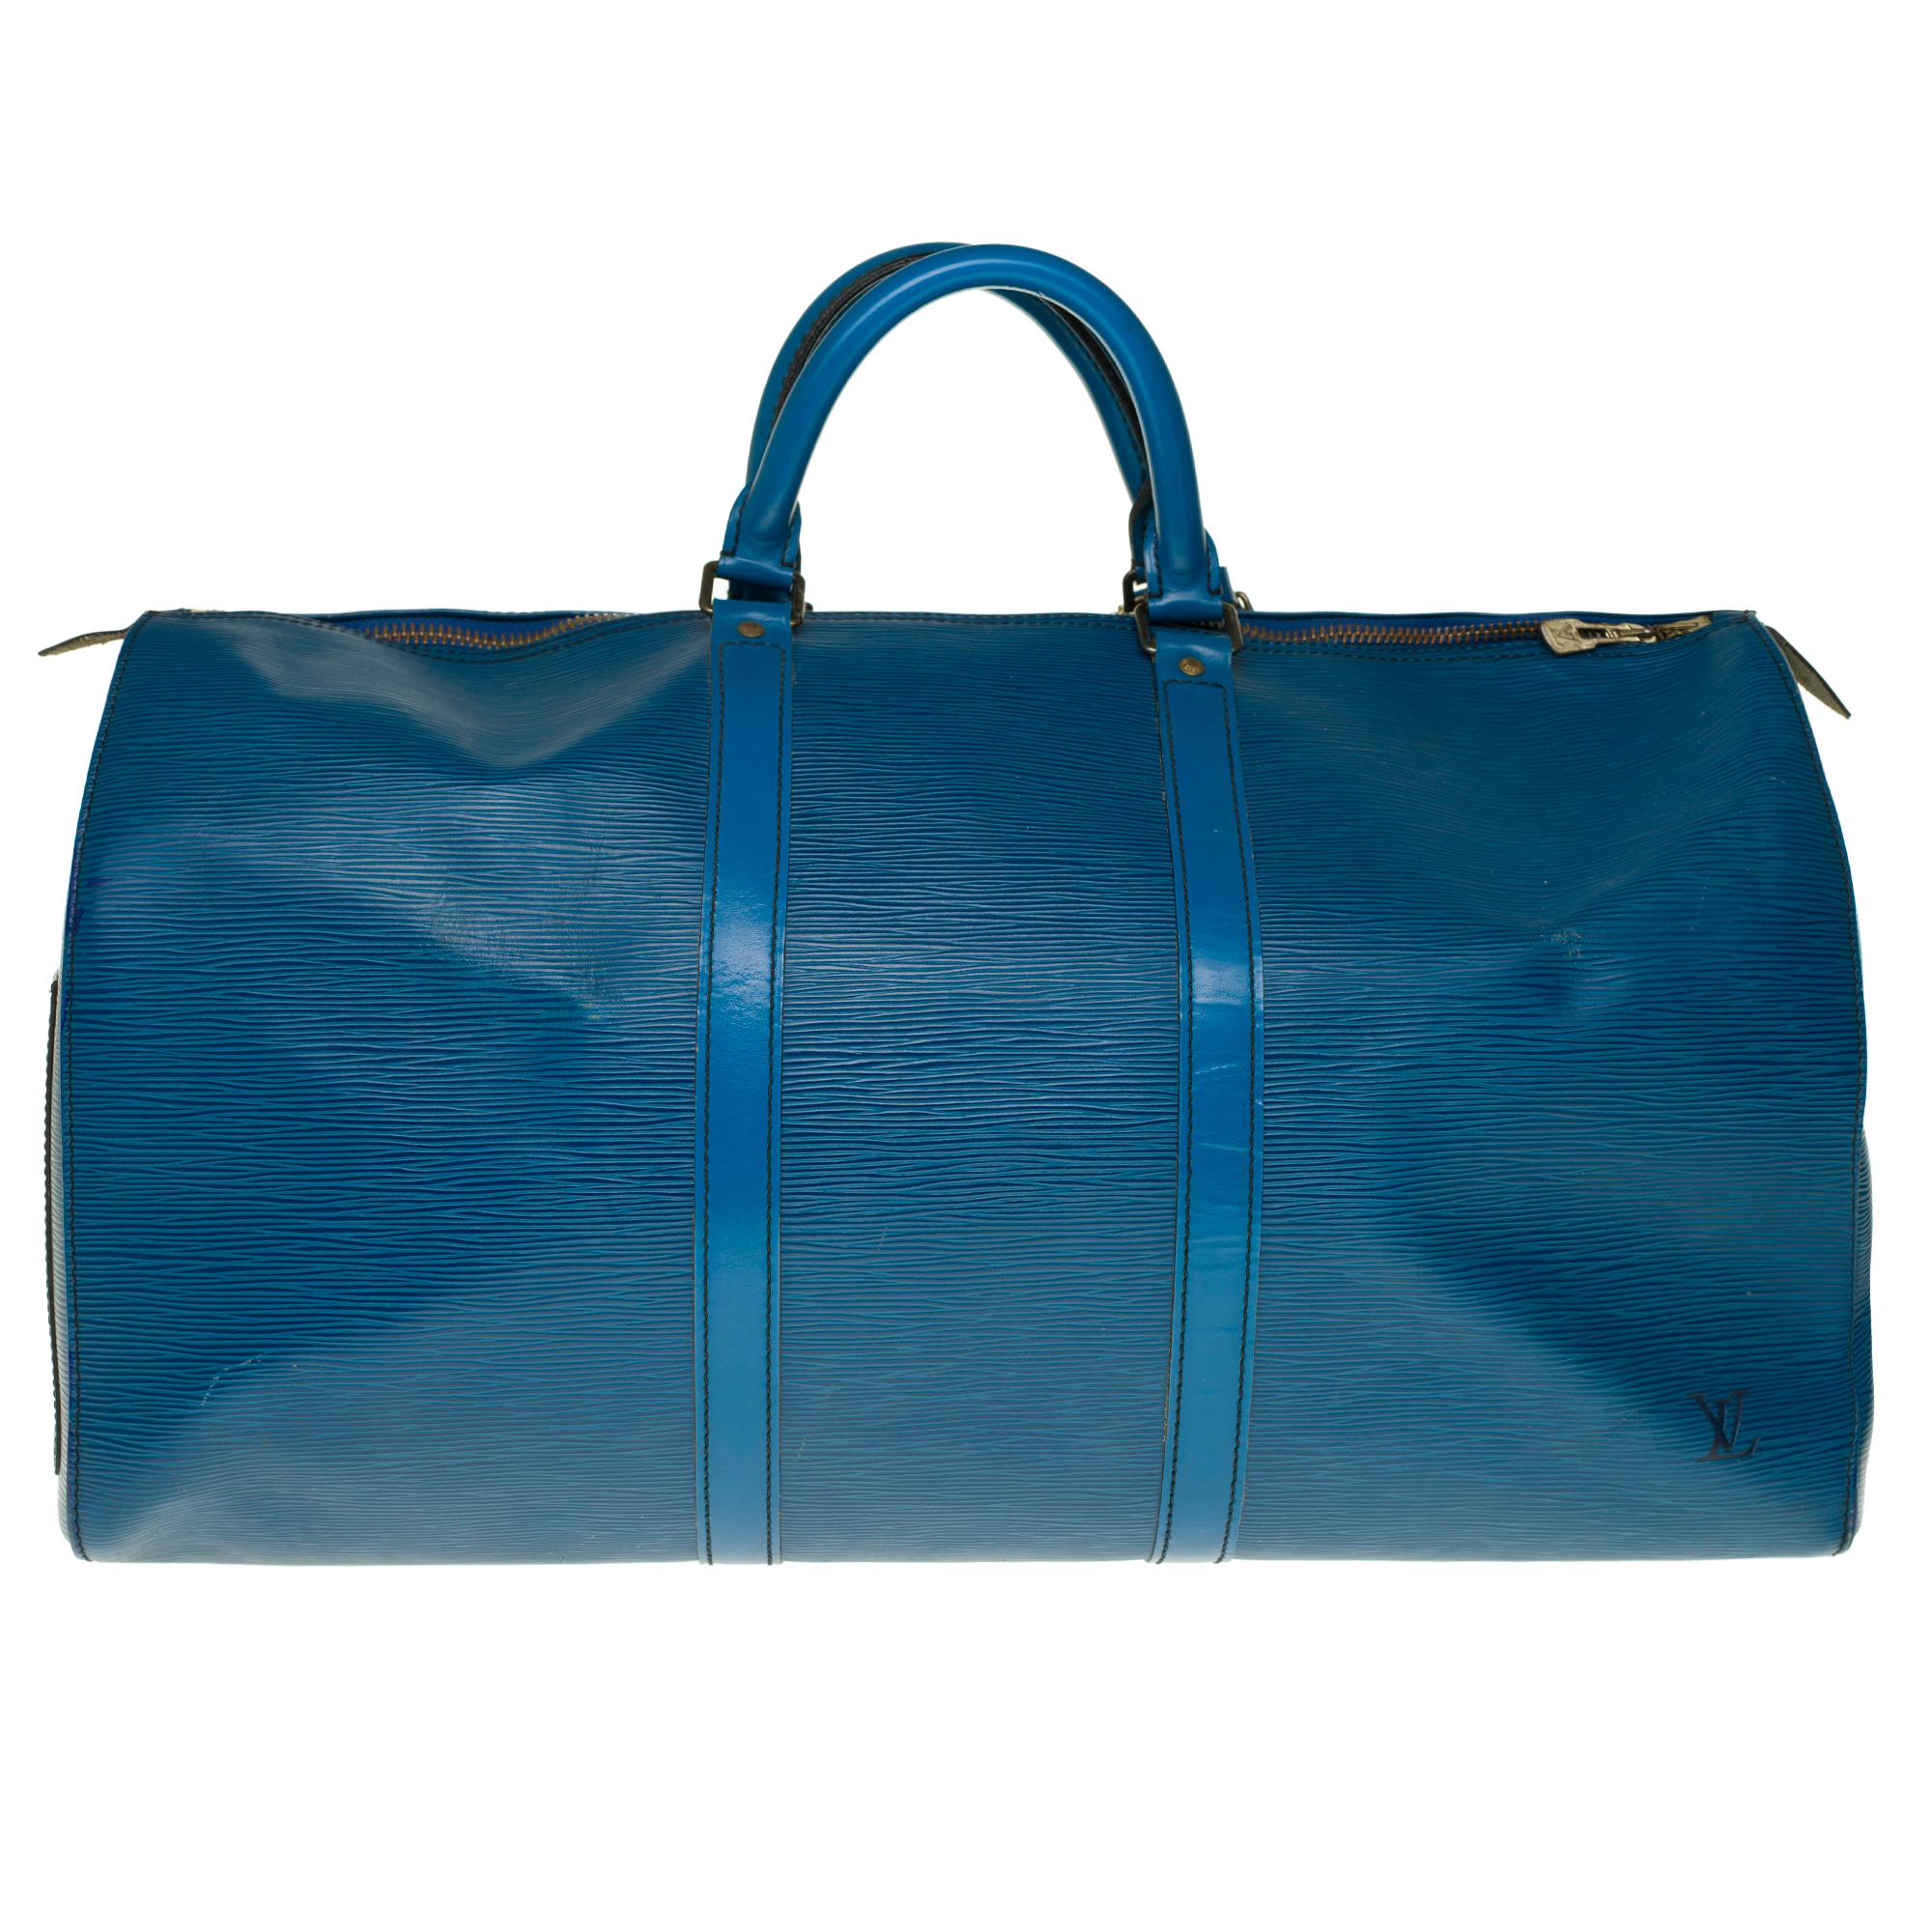 Classic travel bag Louis Vuitton Keepall 55 cm in blue epi leather with gold metal trim, double handle in blue leather allowing a handheld.

Double zipper.
Lining in blue suede.
Signature: 